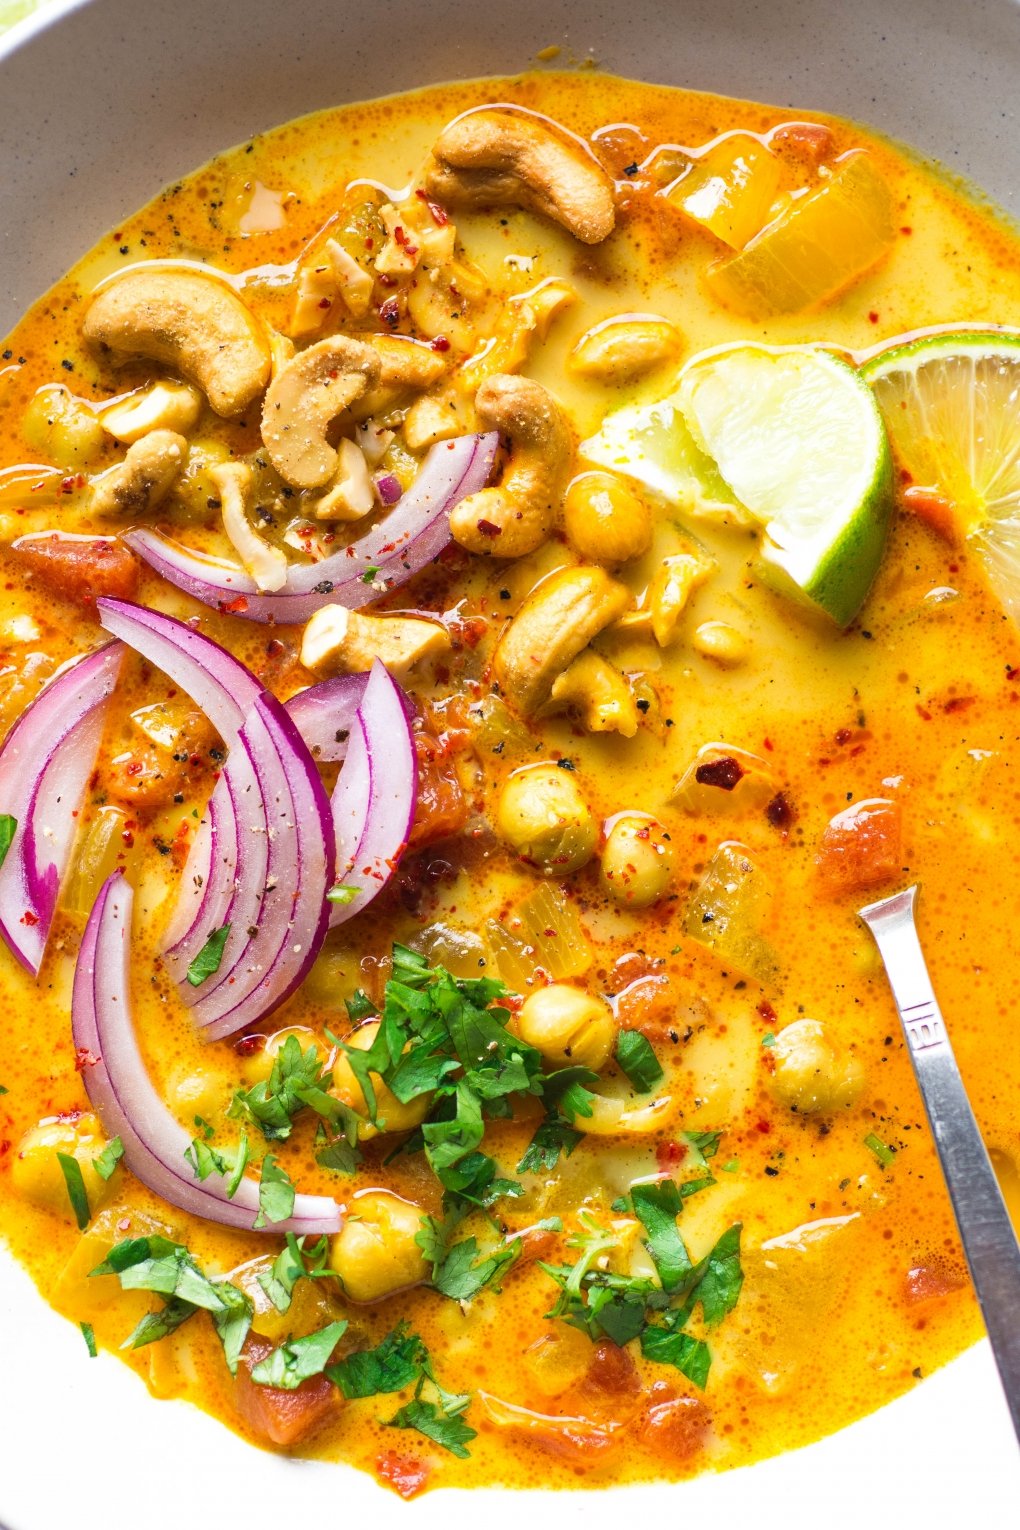 Super close up shot of a large white bowl of bright orange chickpea and tomato coconut curry soup. Soup is topped with fresh red onion slices, chopped herbs, curry spiced cashews, and lime wedges.